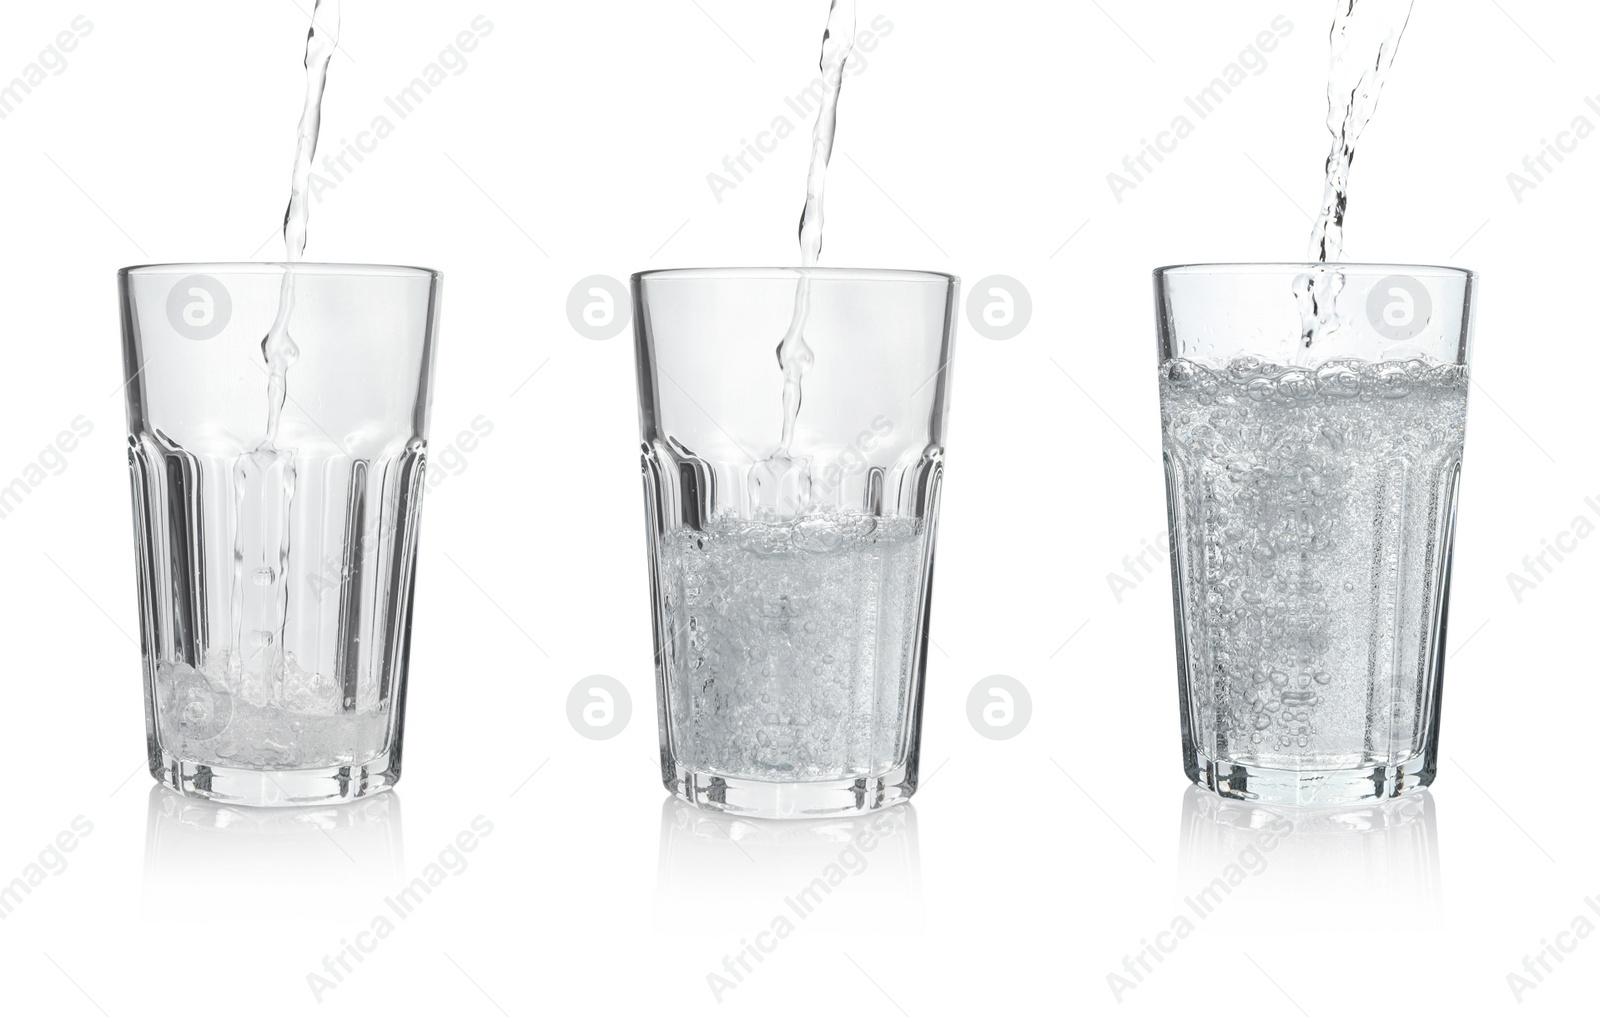 Image of Pouring soda water into glasses on white background, collage